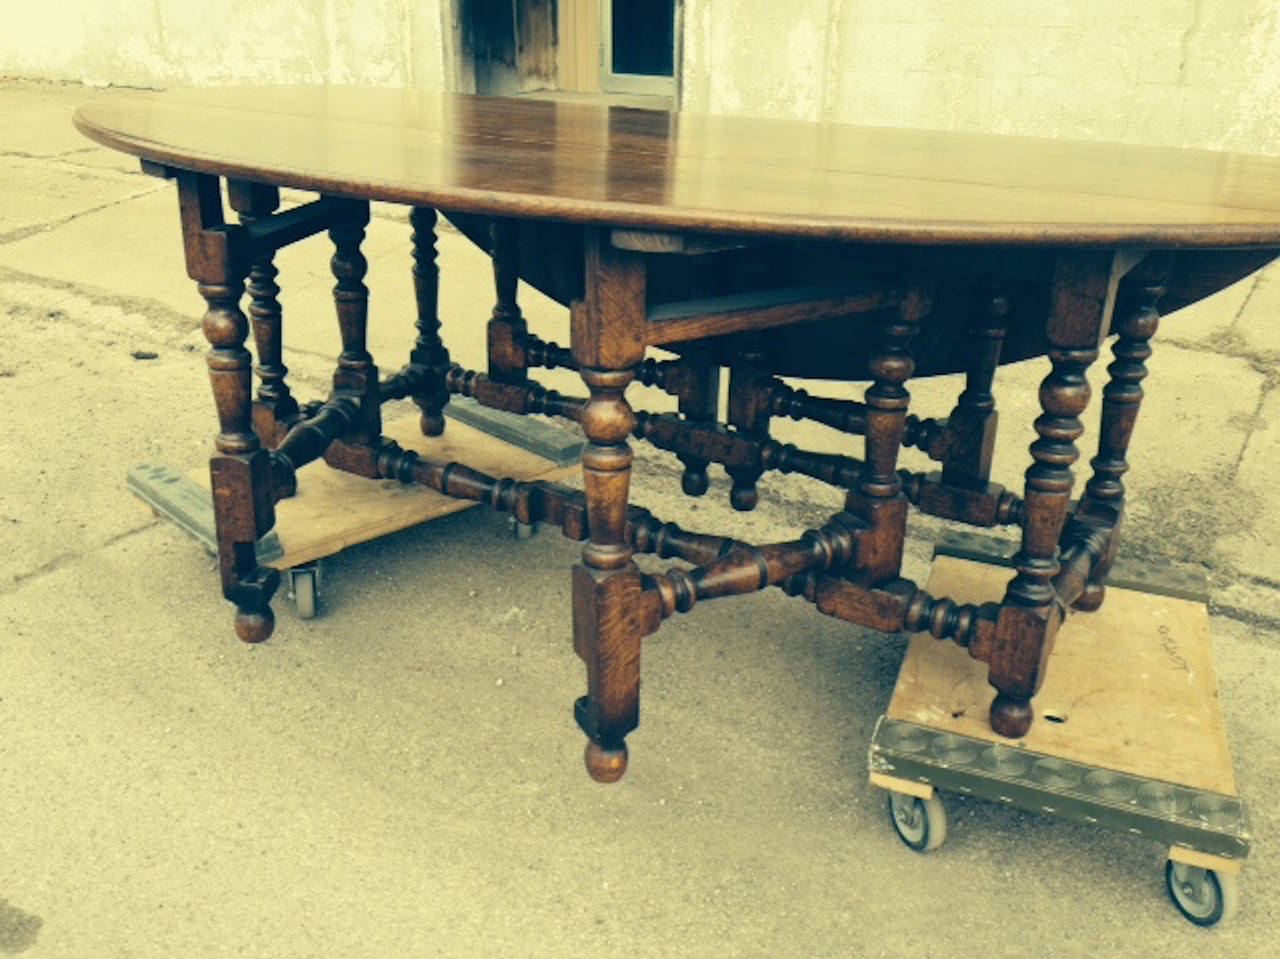 English, Handcrafted 17th Century Style Drop-Leaf Table 2